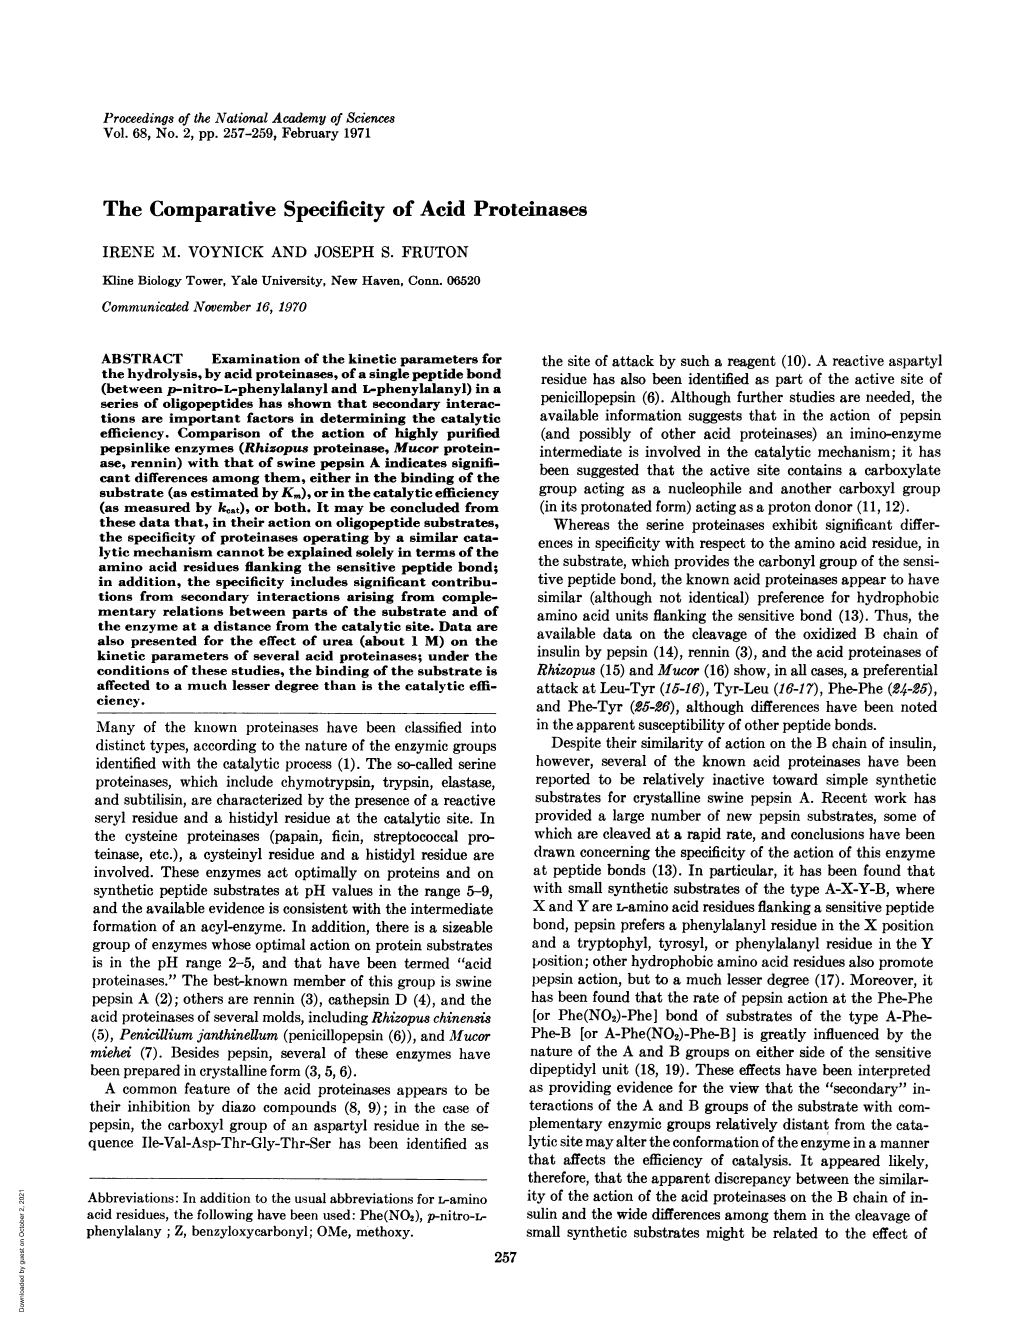 The Comparative Specificity of Acid Proteinases